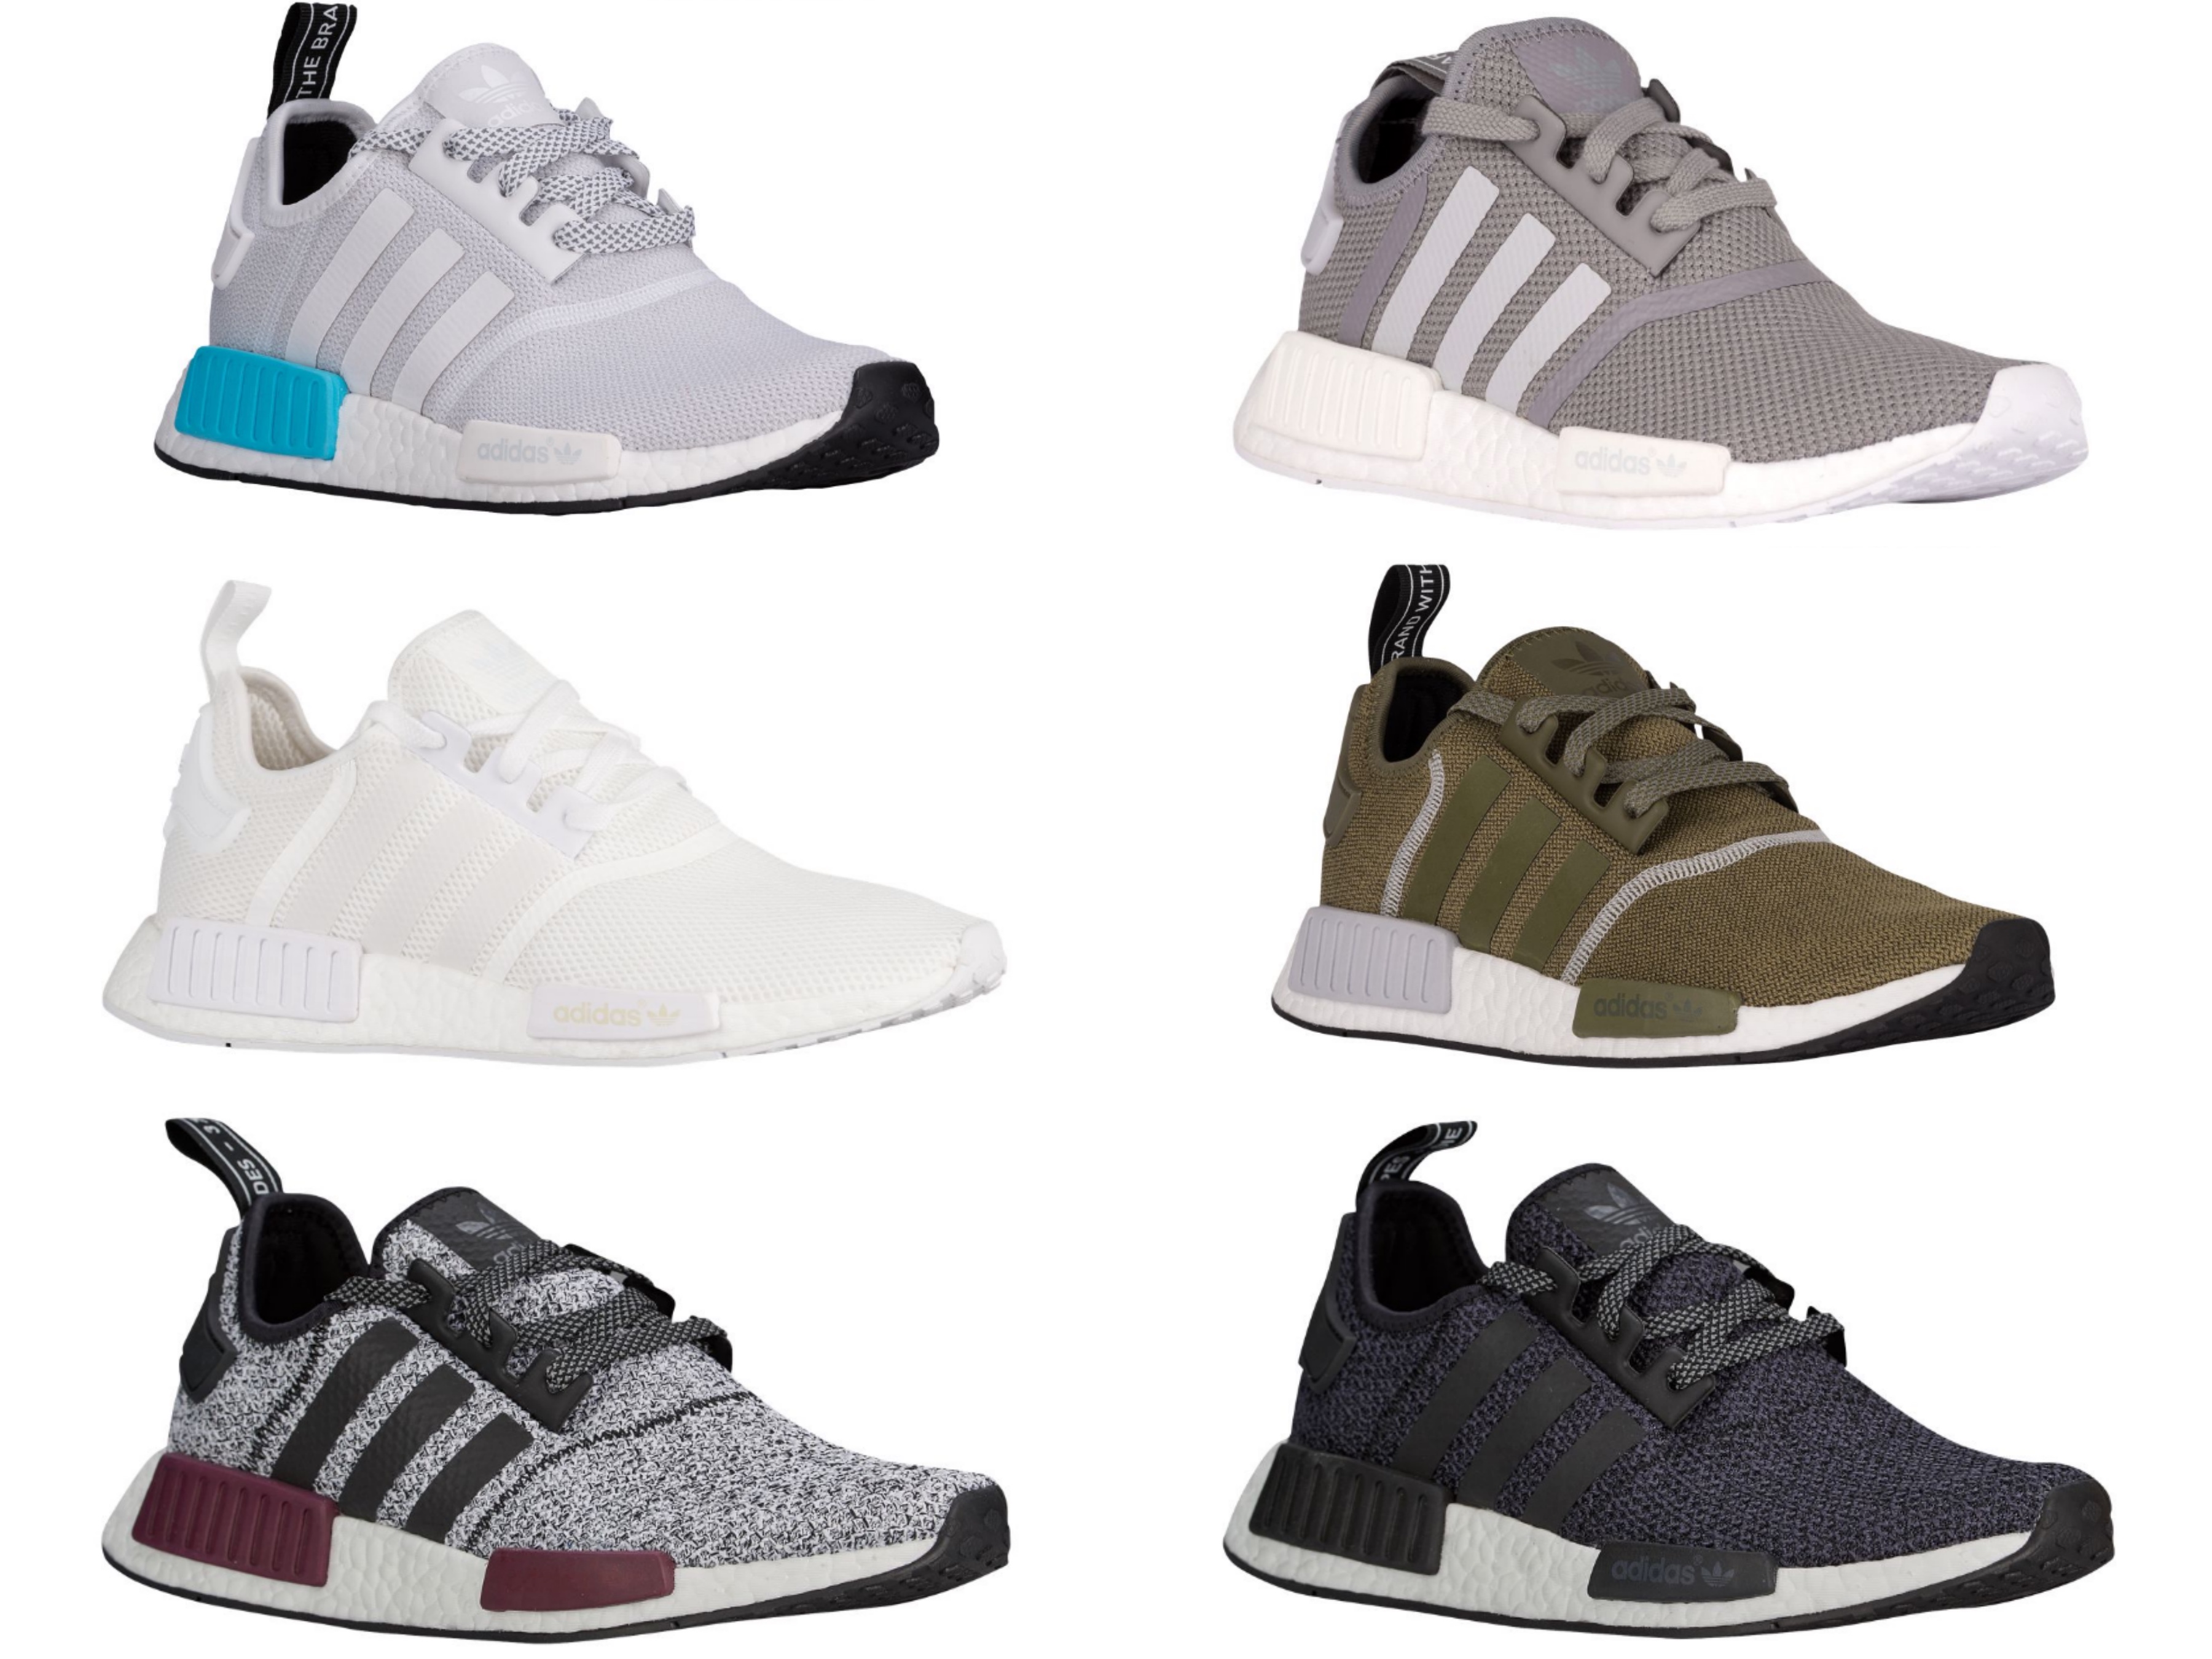 The adidas NMD Has Dropped in Multiple Colorways -